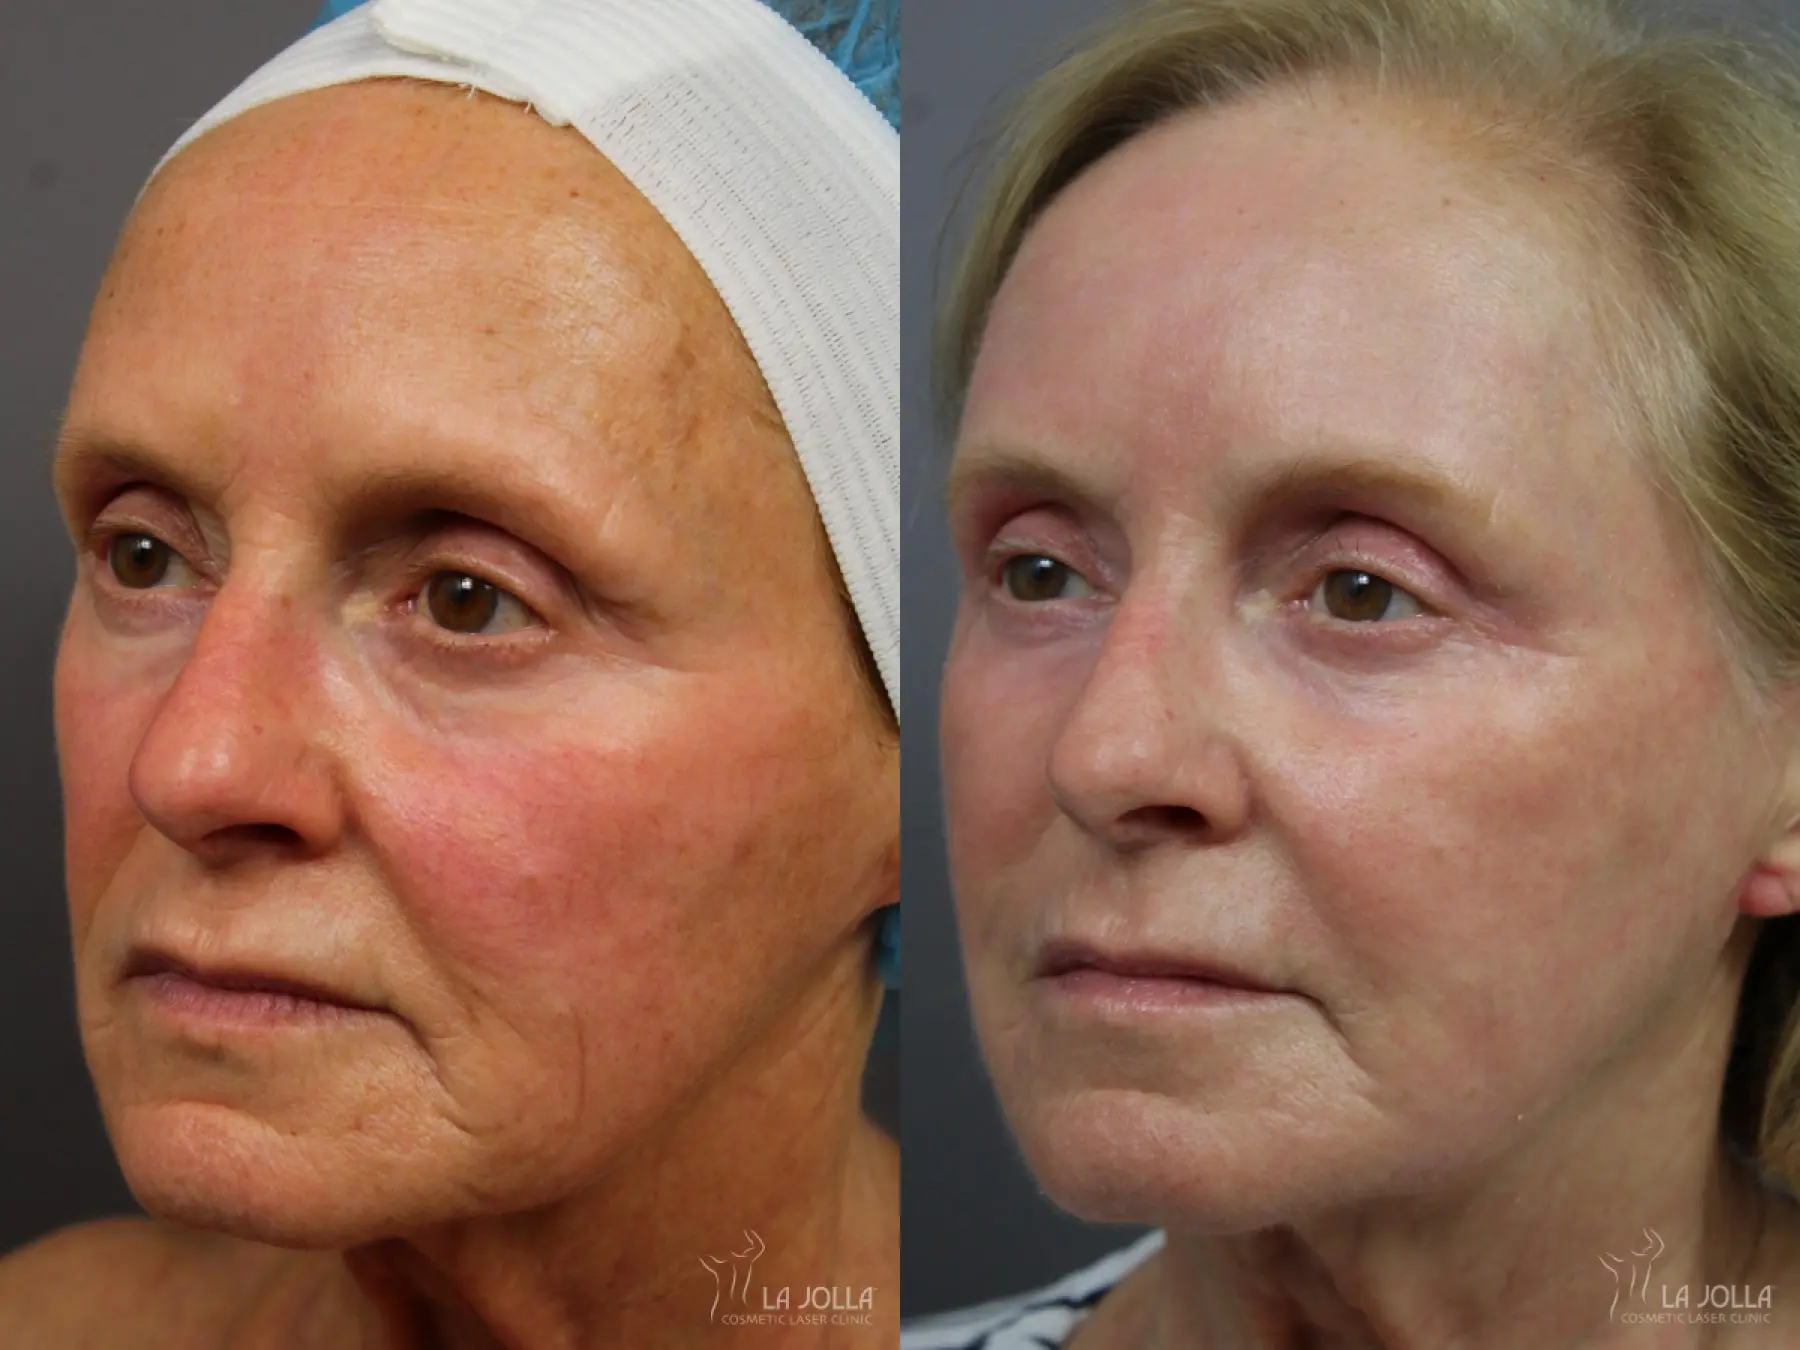 Laser Skin Resurfacing: Patient 2 - Before and After 1